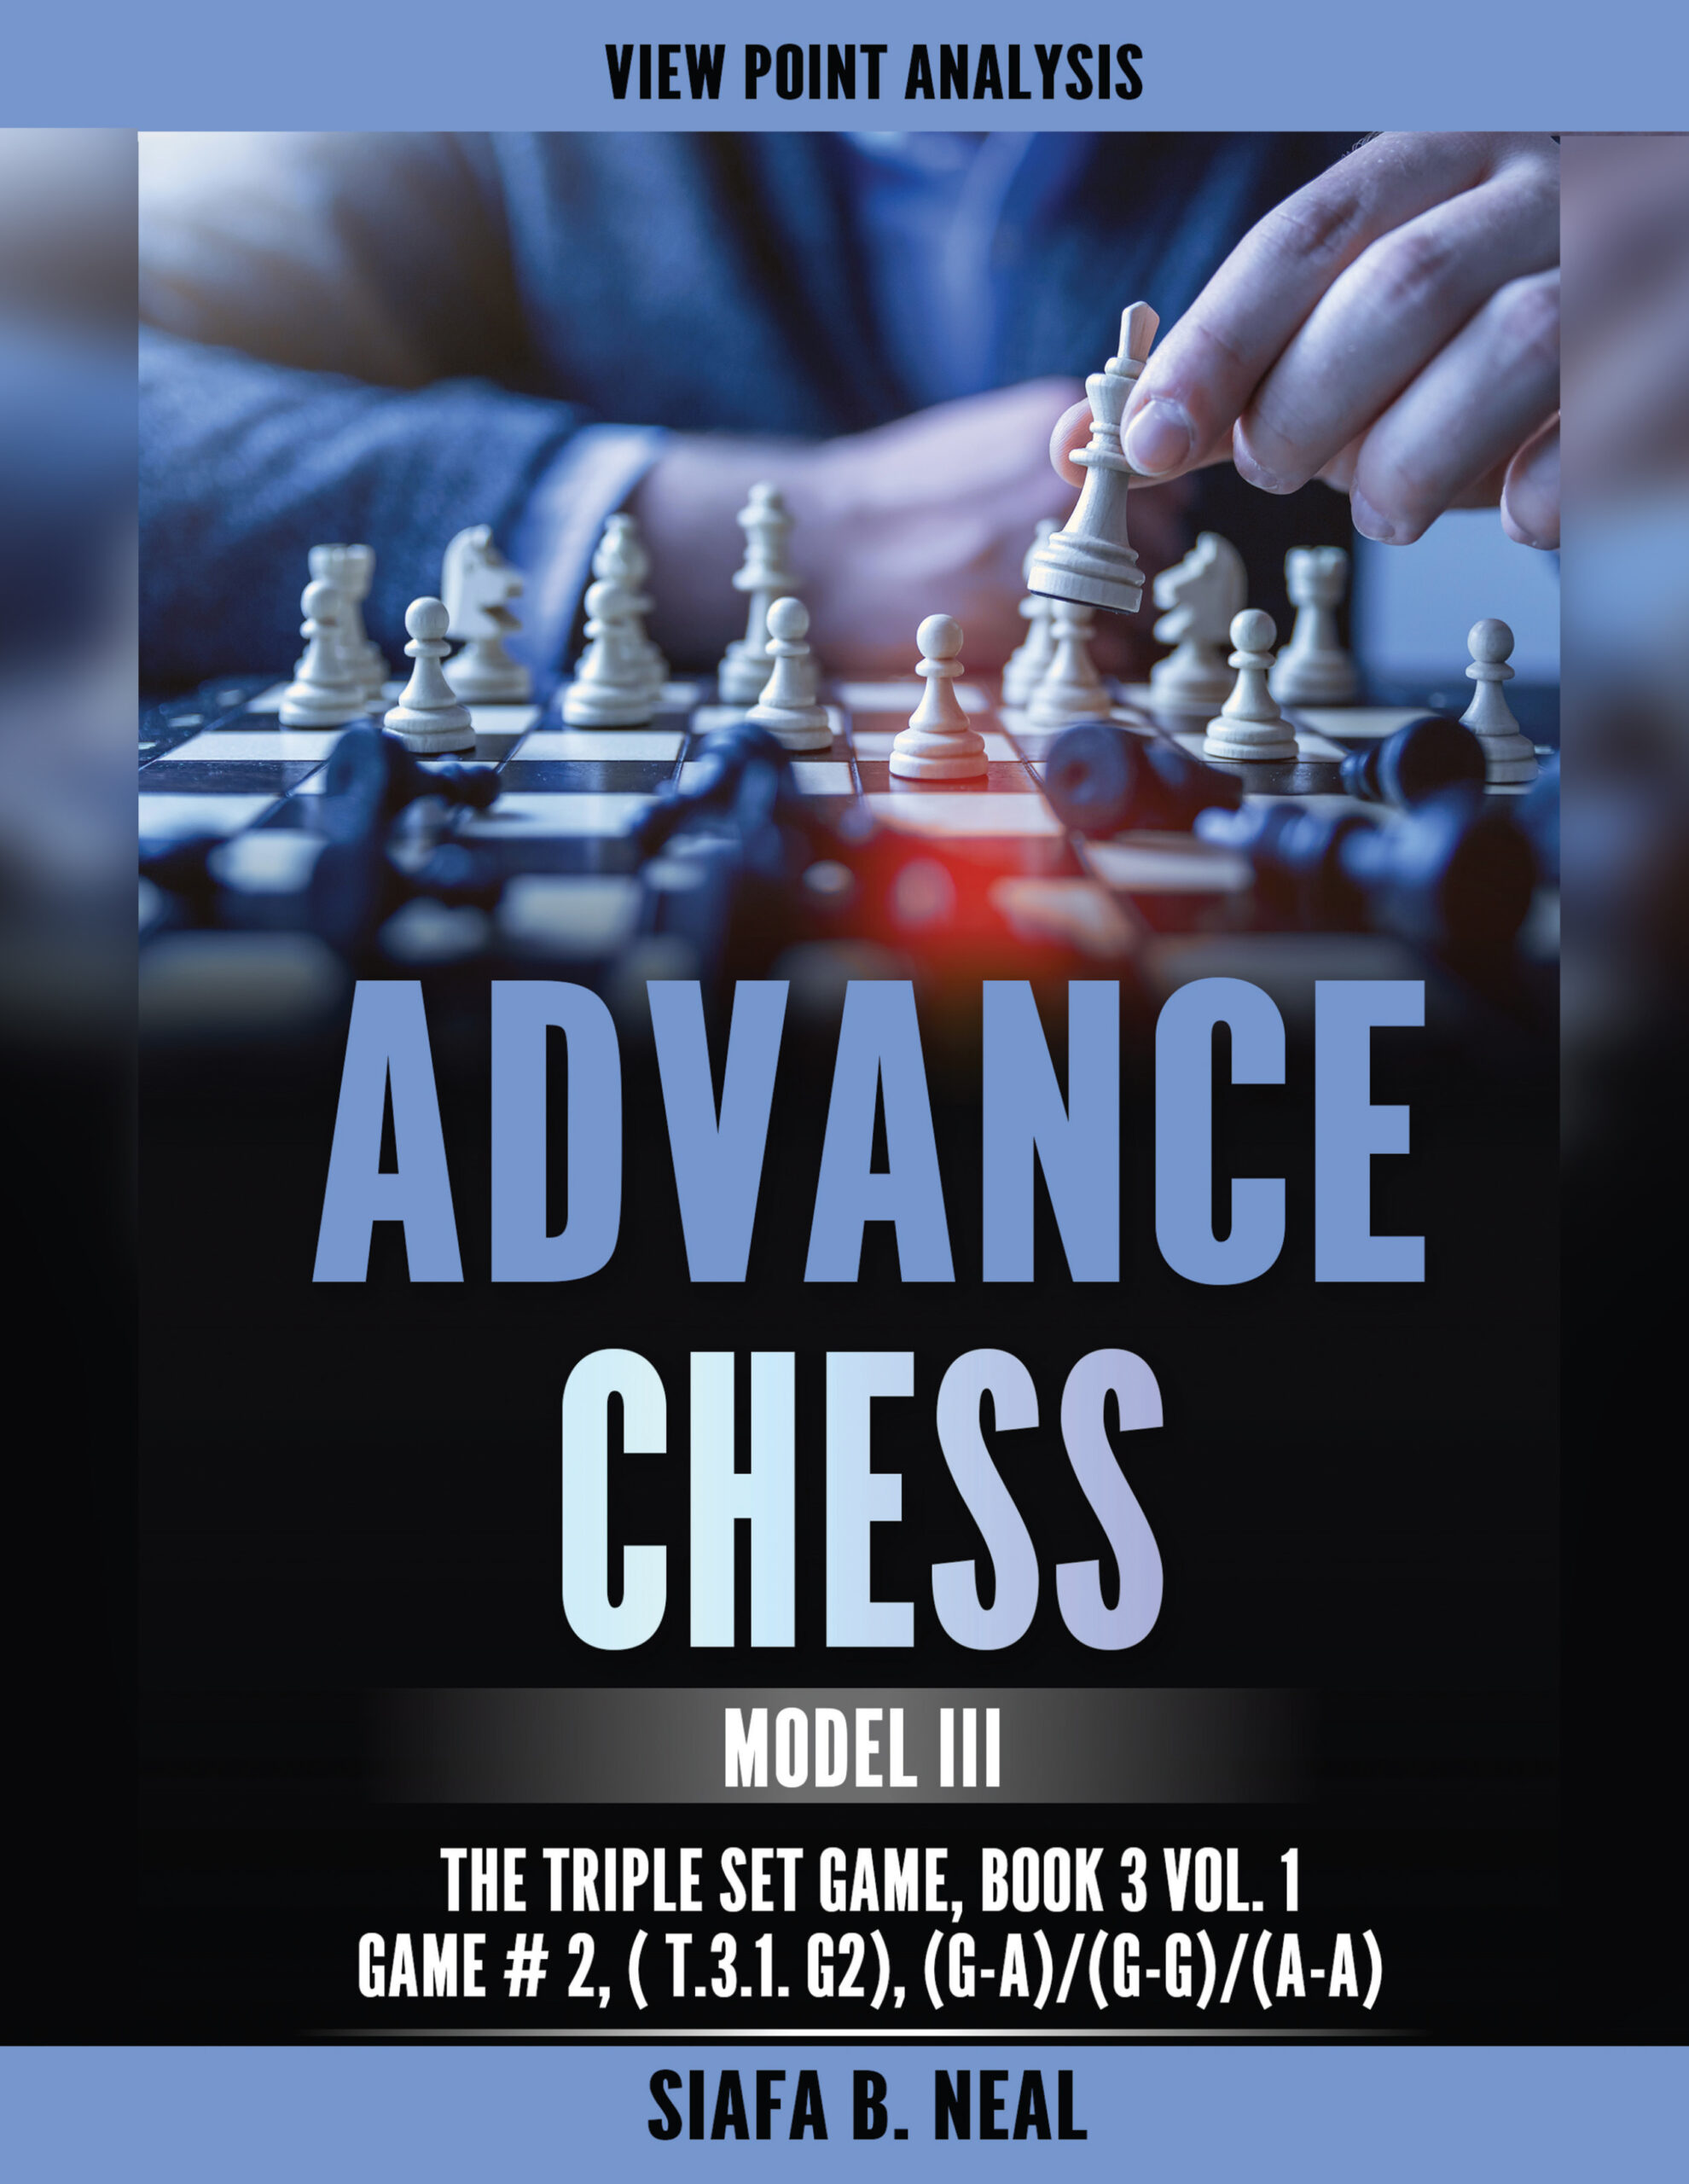 Advance Chess Model III - The Triple Set Double Platform Game, Book 3 Vol. 1 Game #2